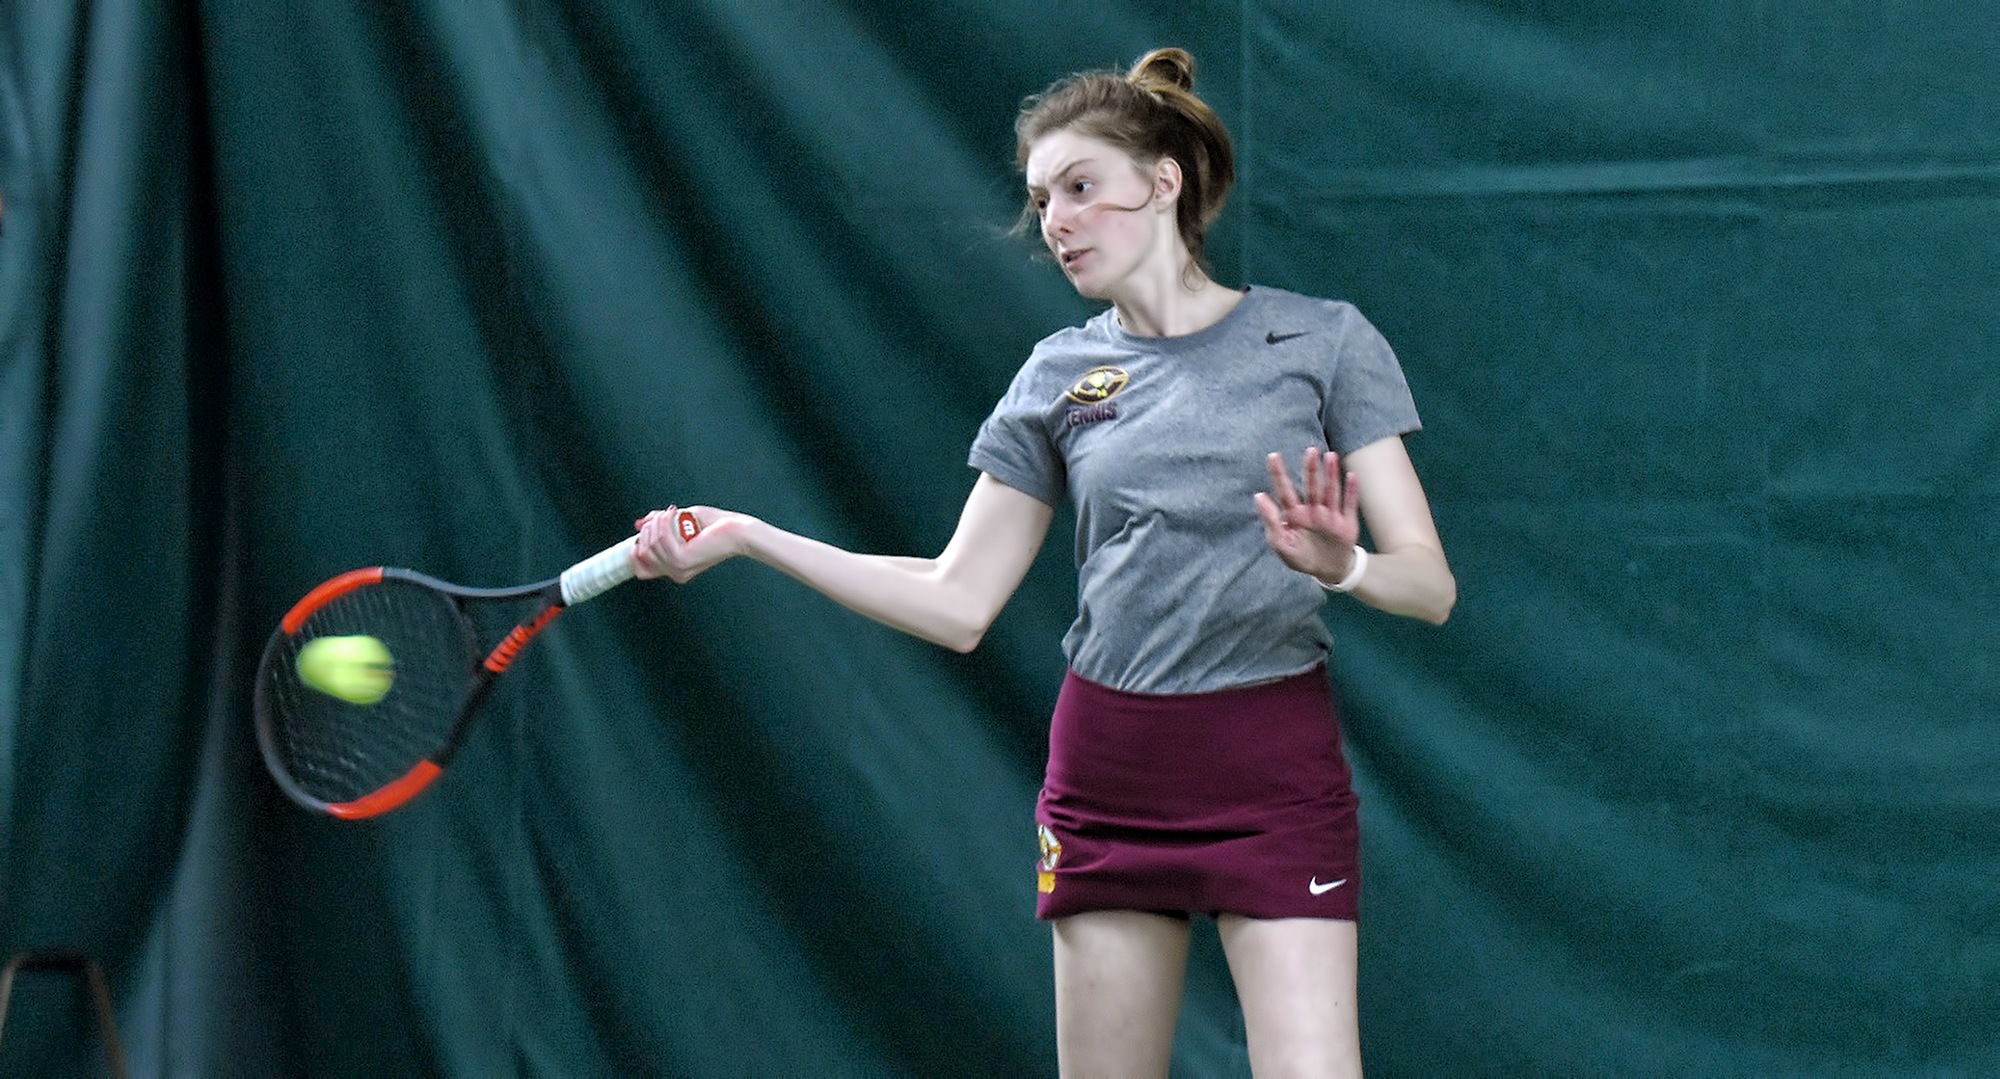 Junior Jenna Forknell recorded a 6-2, 6-4 win at No.2 singles in the Cobbers' match at Wis.-Superior. She is tied for the team lead in singles victories this year.